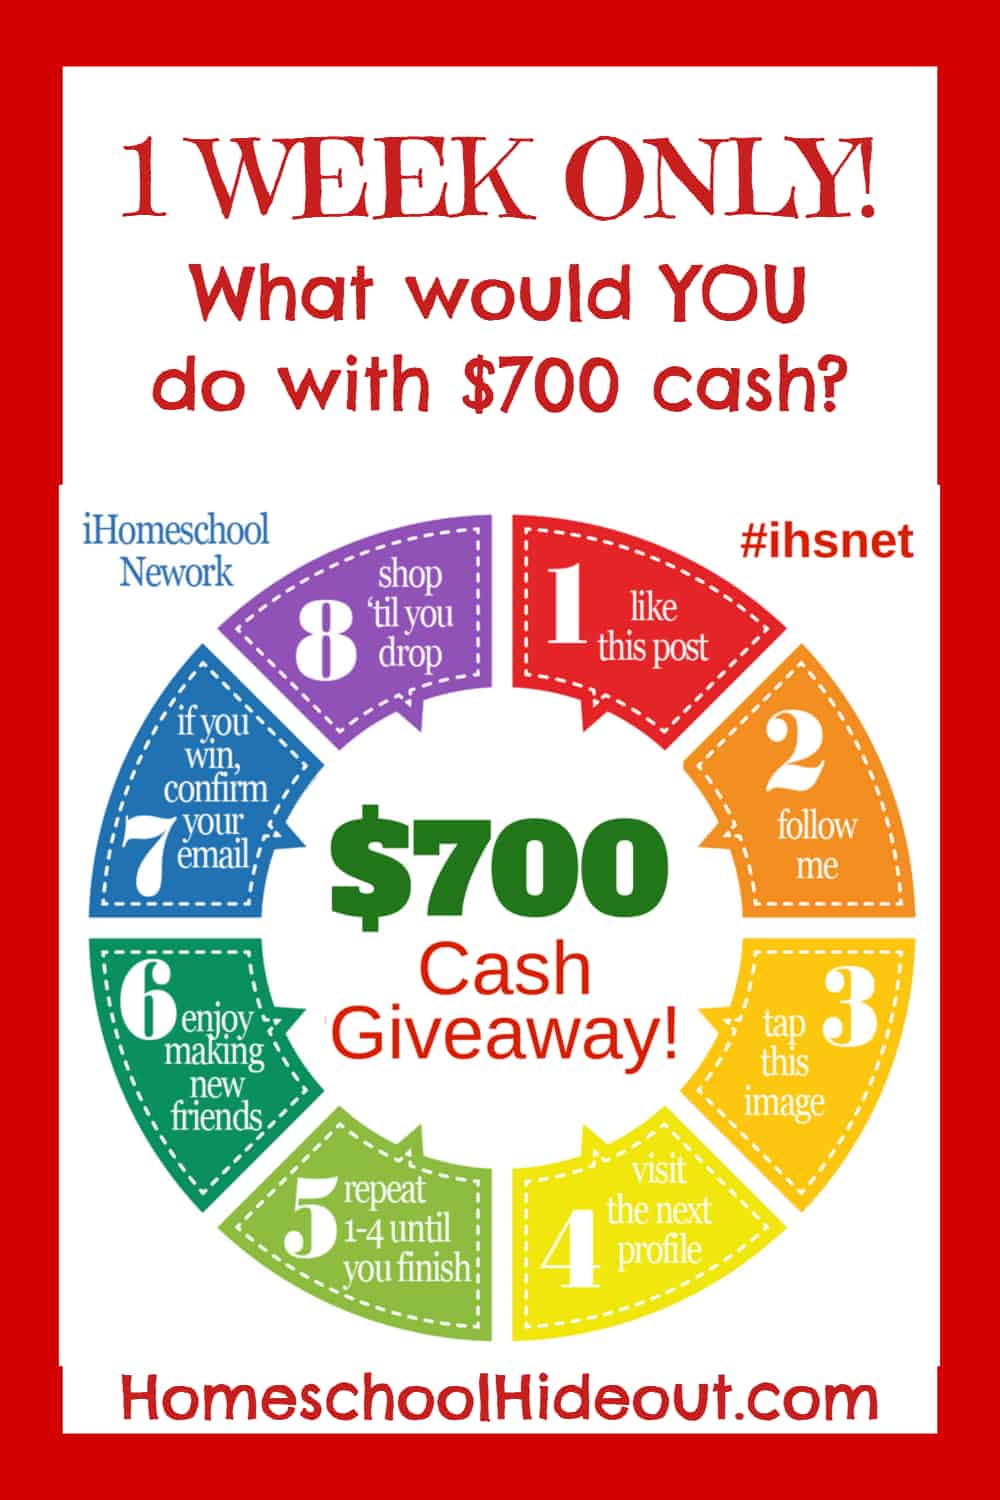 iHomeschool Network is blessing one mama with a $700 cash giveaway! One week only!